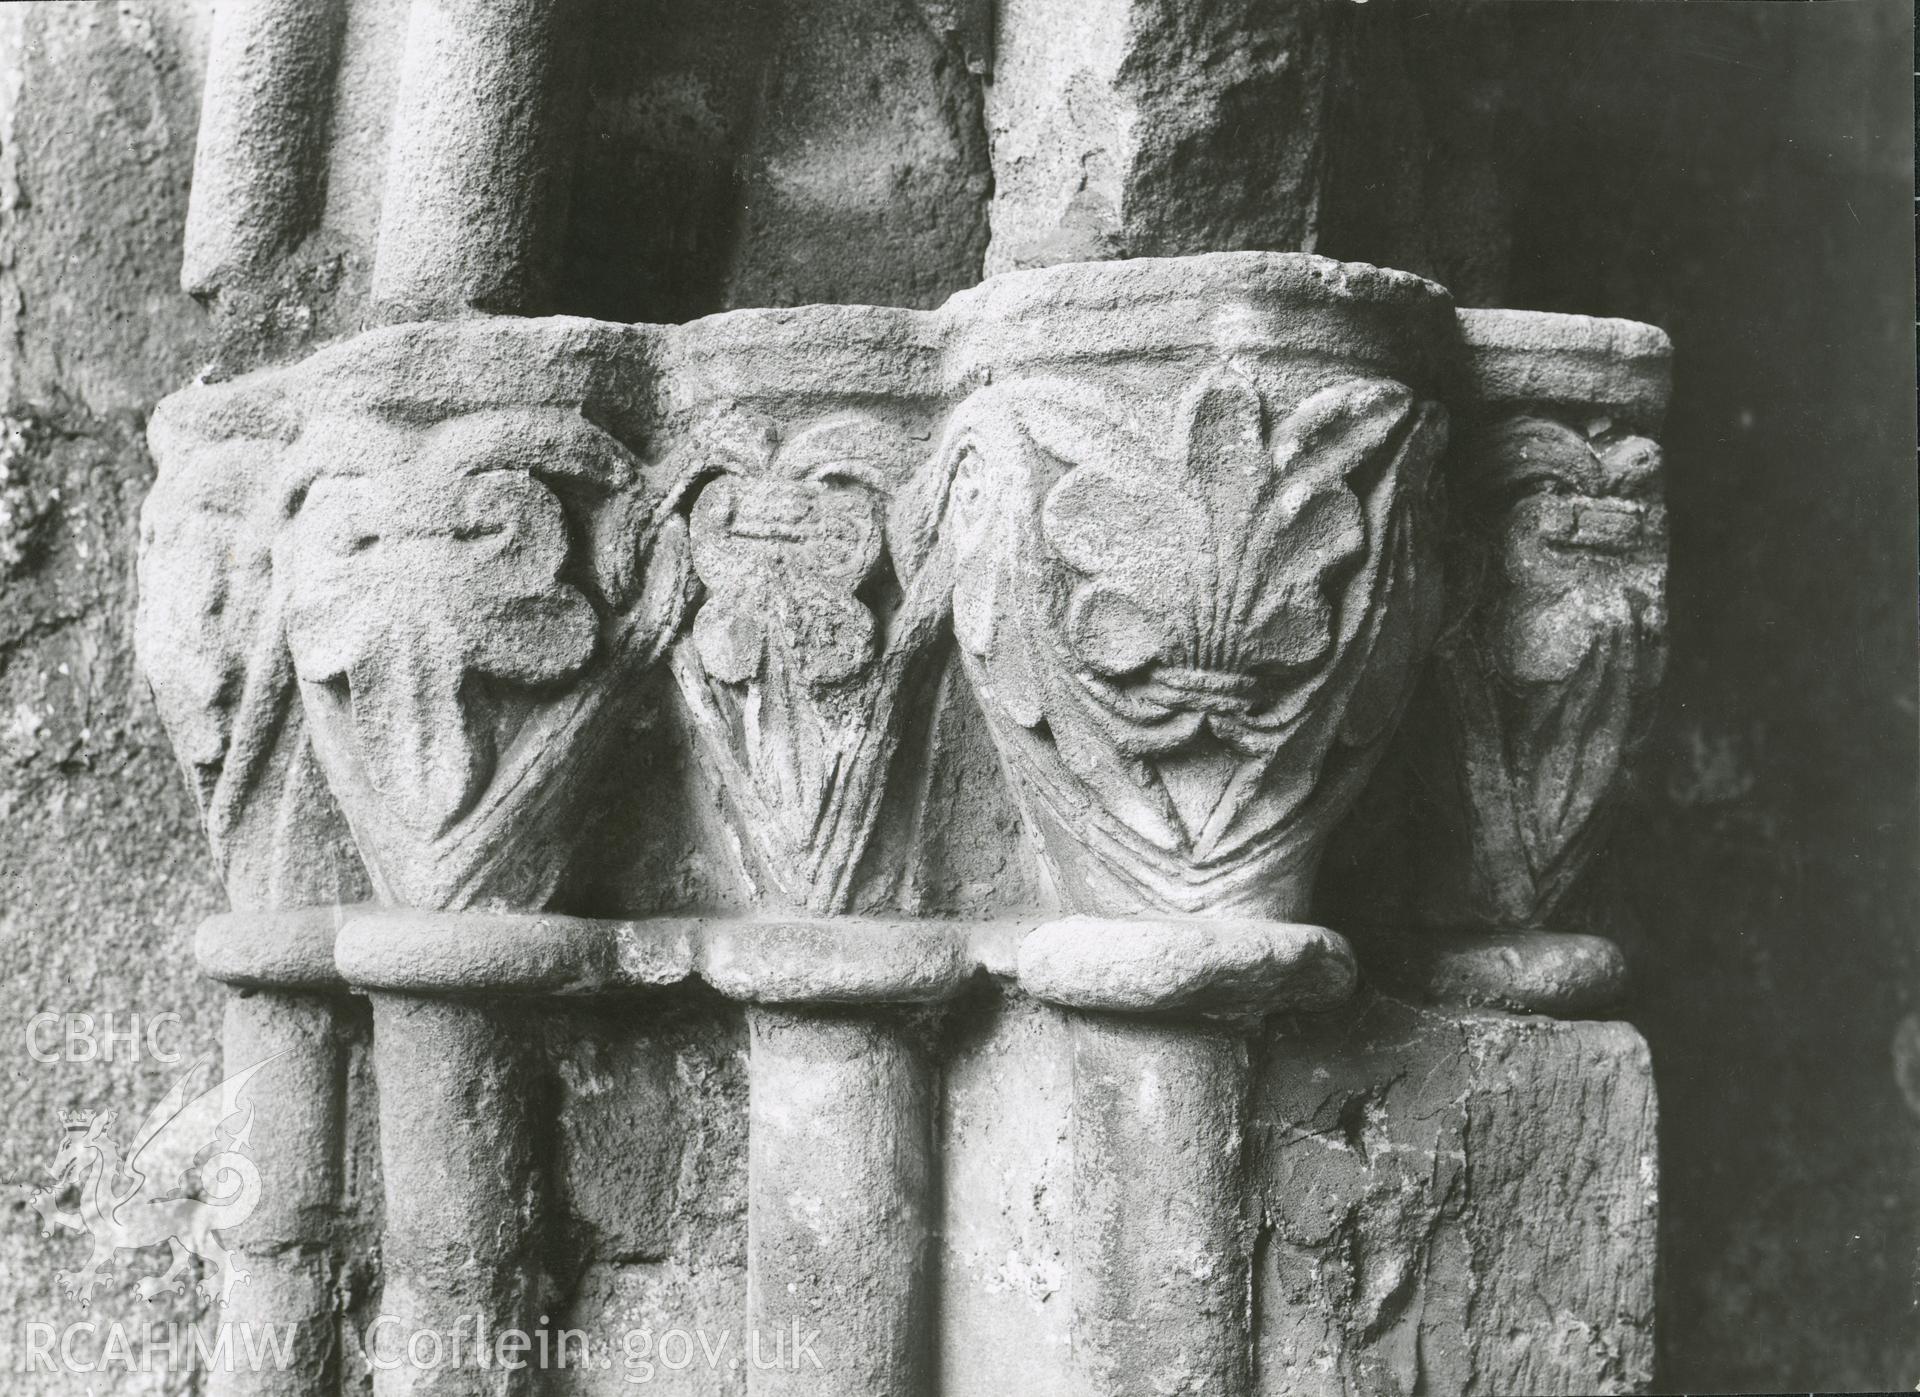 Digitised copy of a black and white photograph showing detail of archway to cloister on east side of  Valle Crucis Abbey, taken by F.H. Crossley, 1949. Copied from print as negative held by NMR England (Historic England).